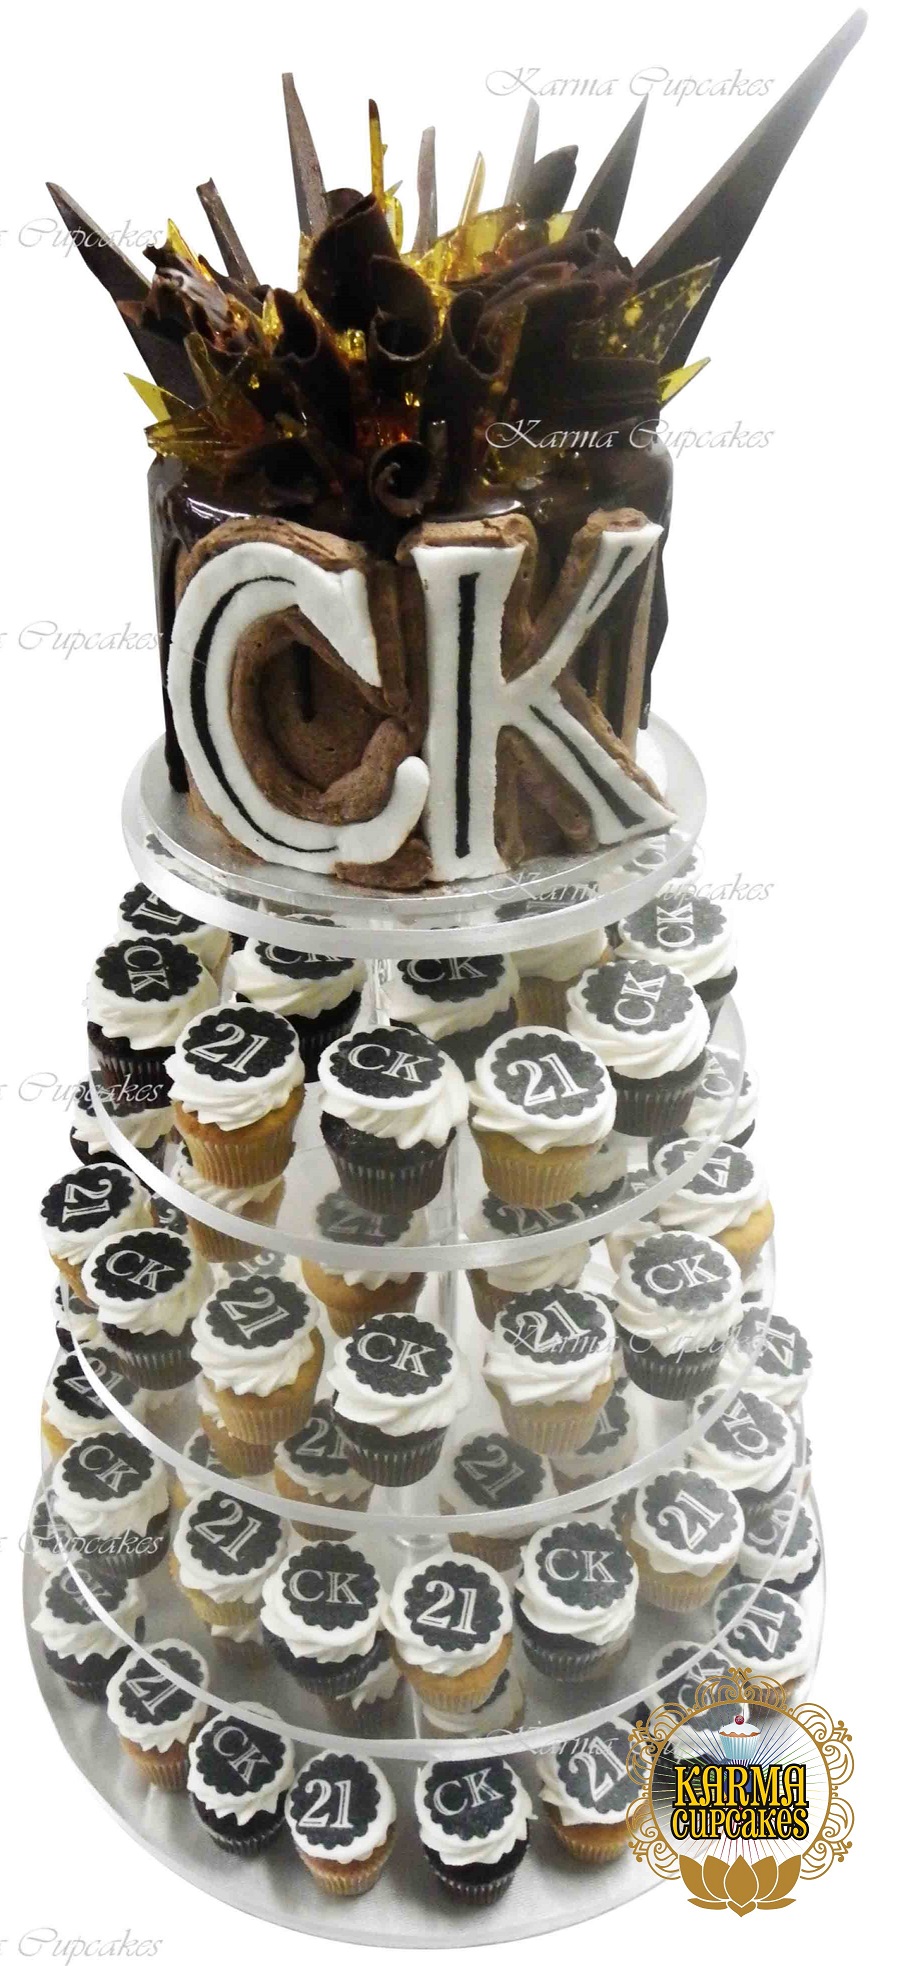 Toffee and Chocolate Shards 6'' cake for your cupcake tower